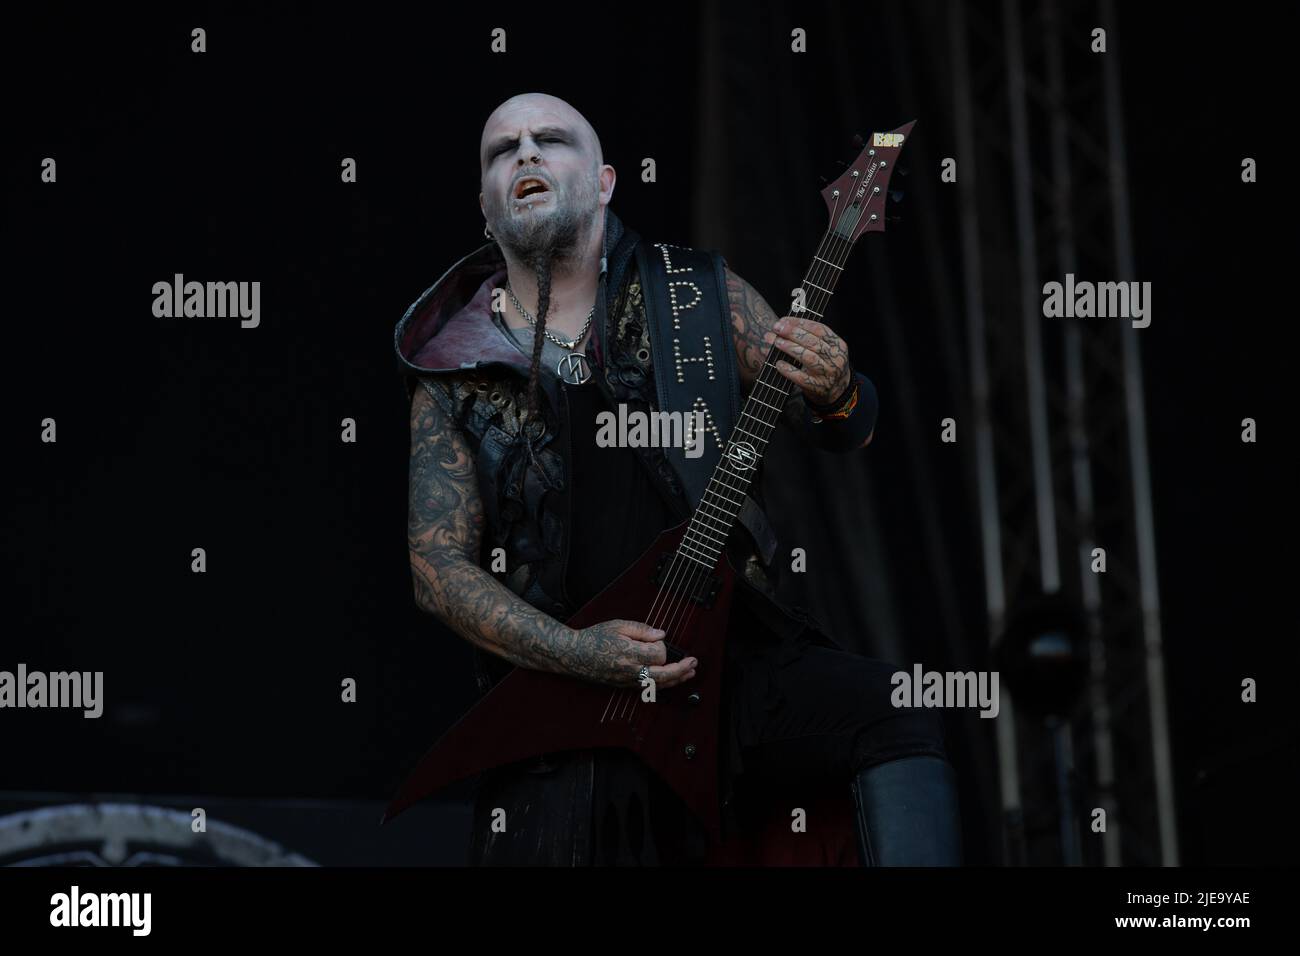 Oslo, Norway. 24th, June 2022. The Norwegian symphonic black metal band Dimmu Borgir performs a live concert during the Norwegian music festival Tons of Rock 2022 in Oslo. Here guitarist Silenoz is seen live on stage. (Photo credit: Gonzales Photo - Per-Otto Oppi). Stock Photo